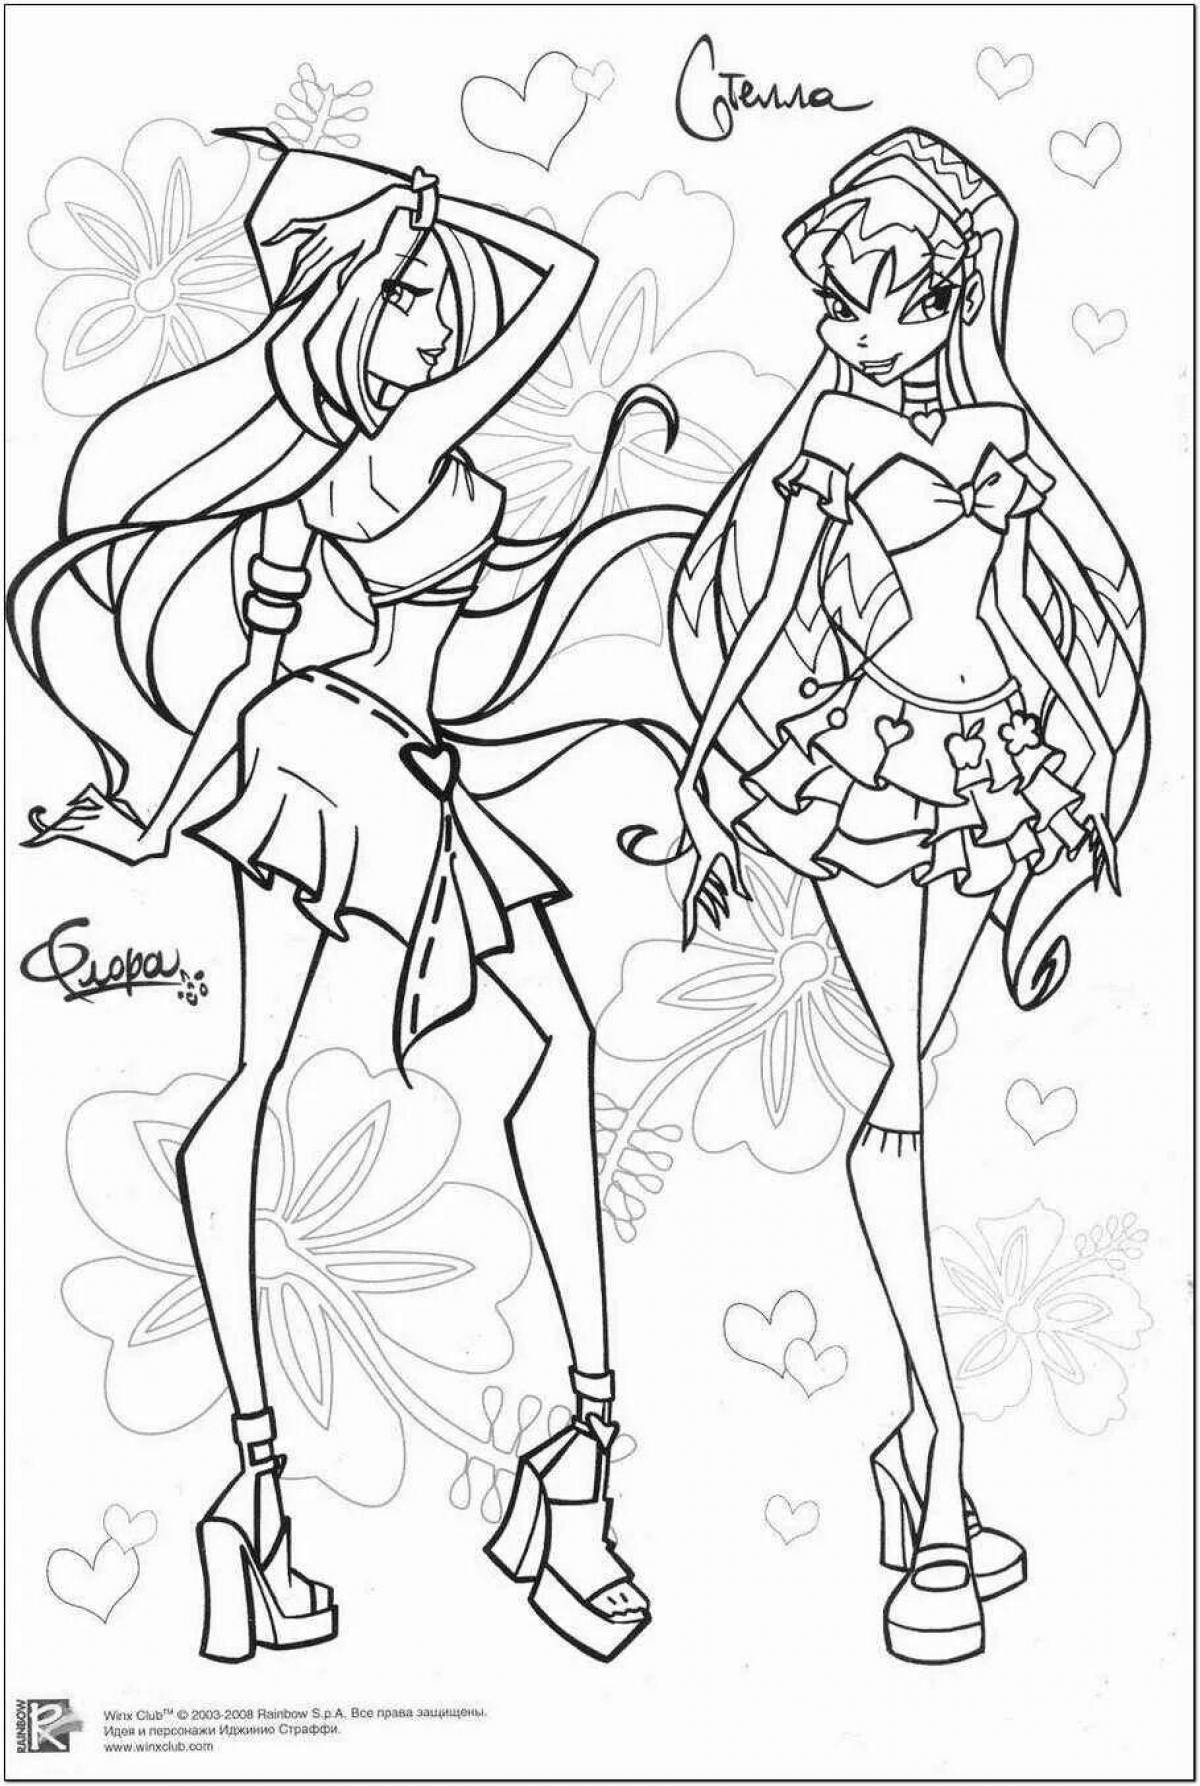 Exquisite winx space coloring page